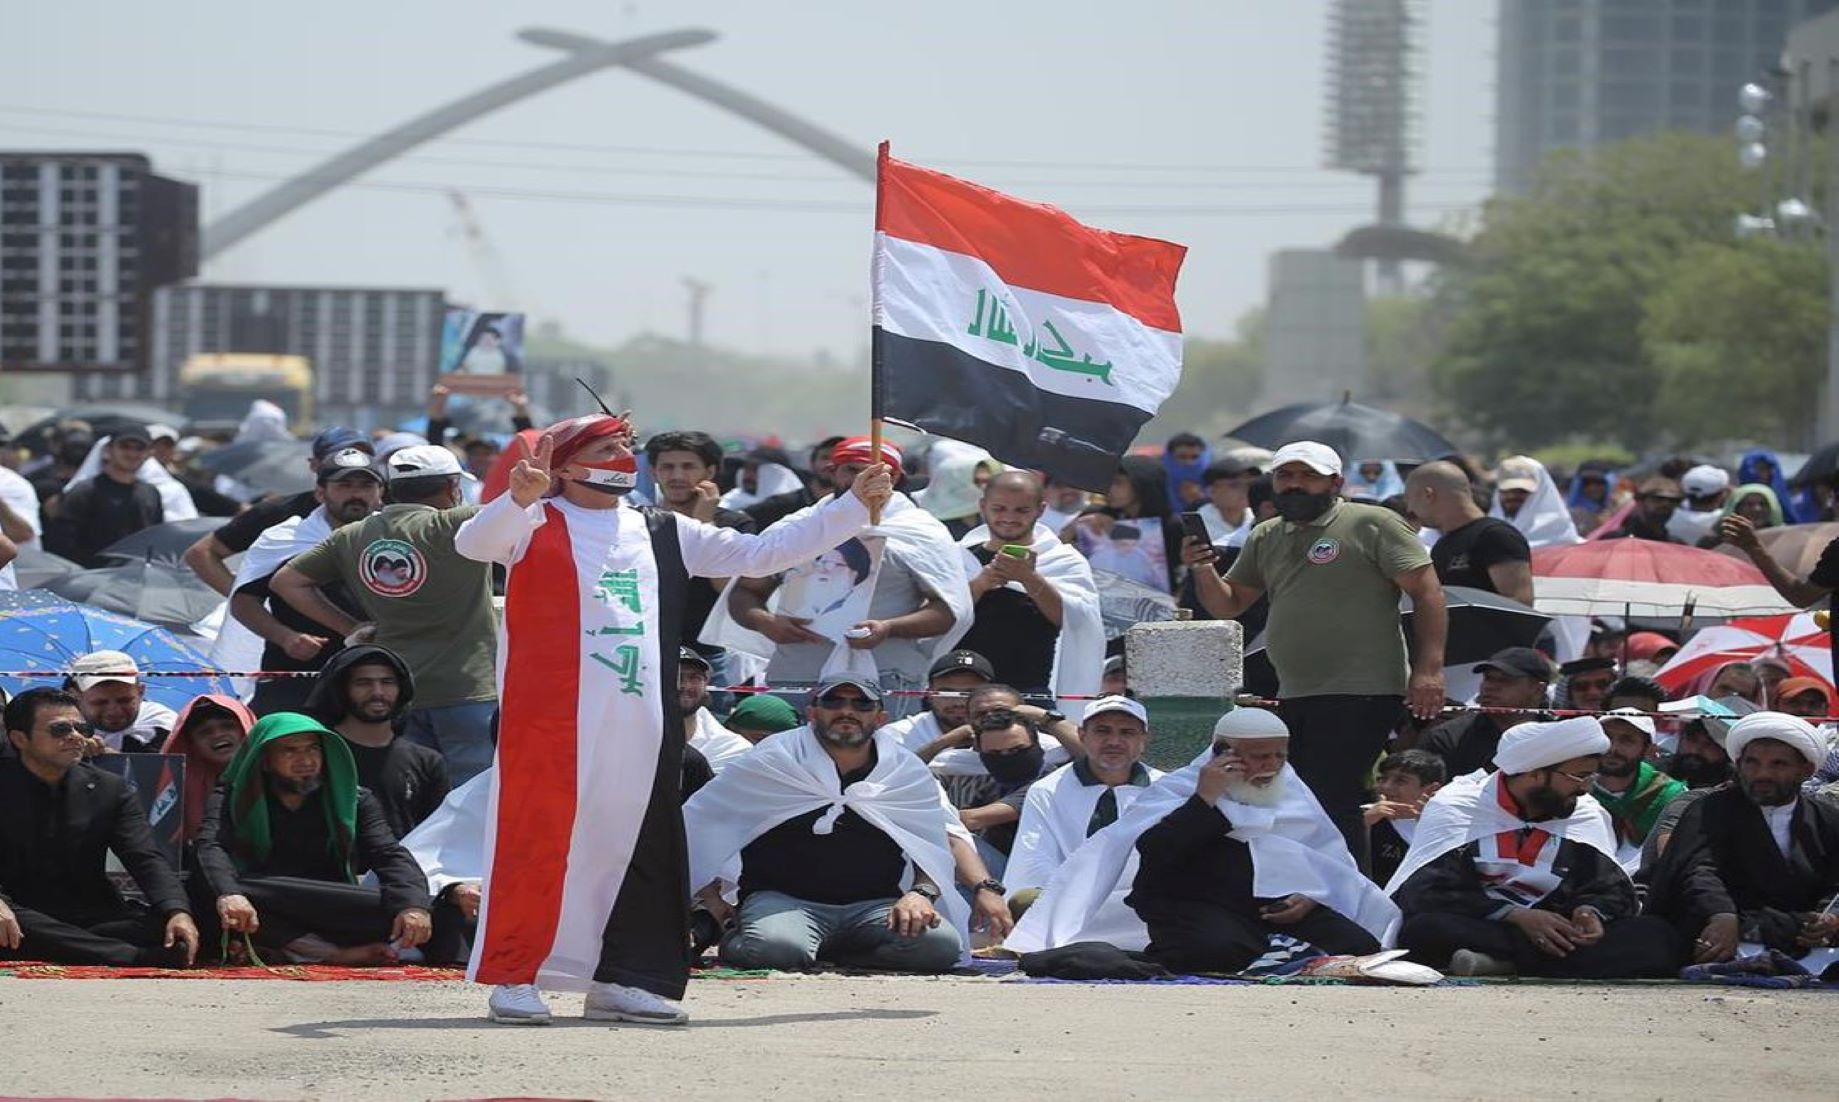 Prominent Shiite Cleric’s Opponents Launch Rival Sit-In In Iraqi Capital